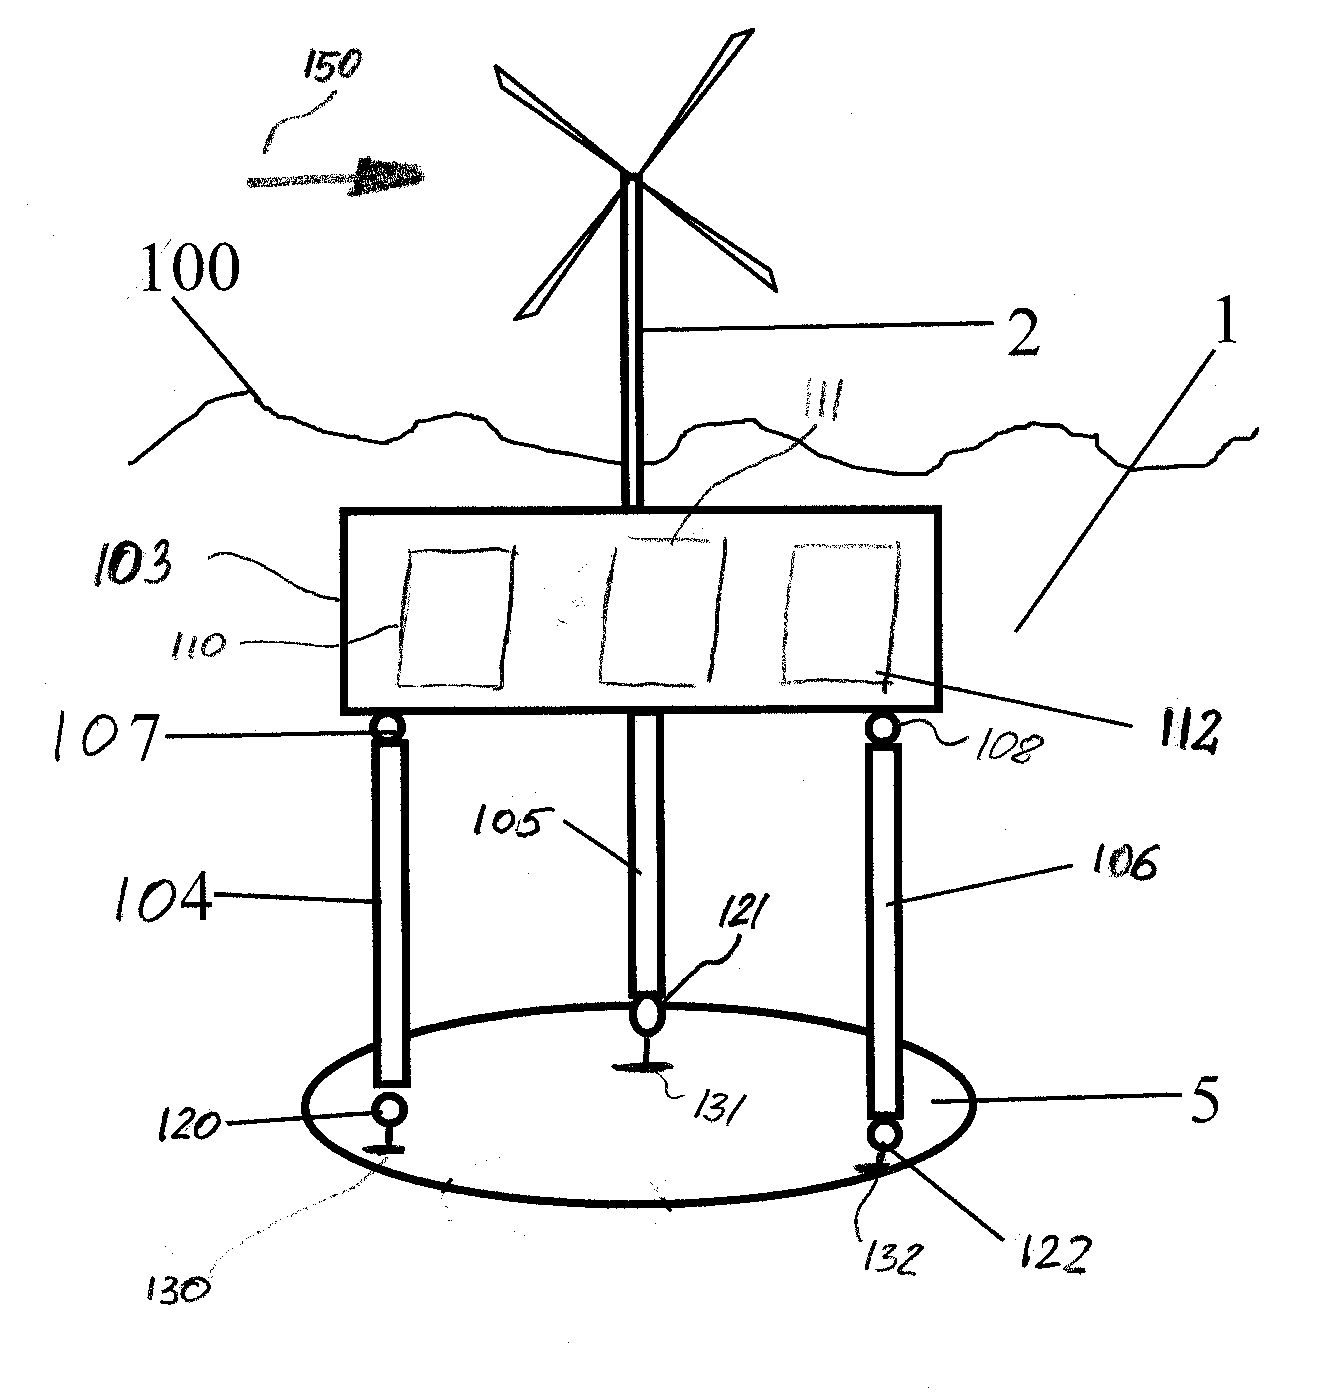 System and method for mounting equipment and structures offshore